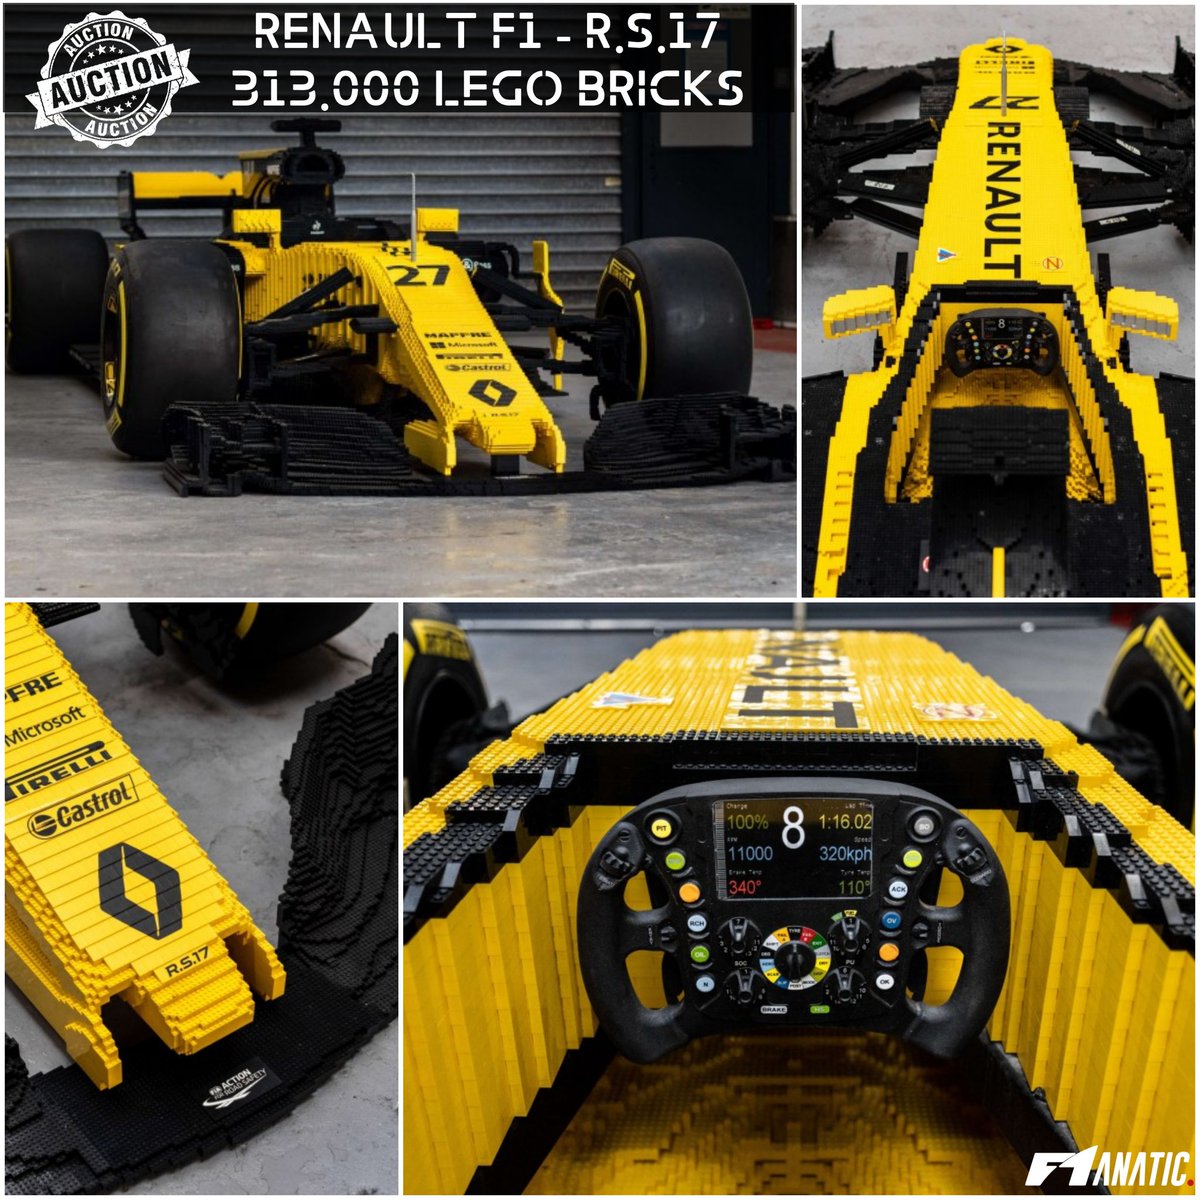 F1anatic on "Renault F1 Team and LEGO! It took several months to put together the 313 000 bricks. The Renault Formula car, constructed from LEGO bricks will be